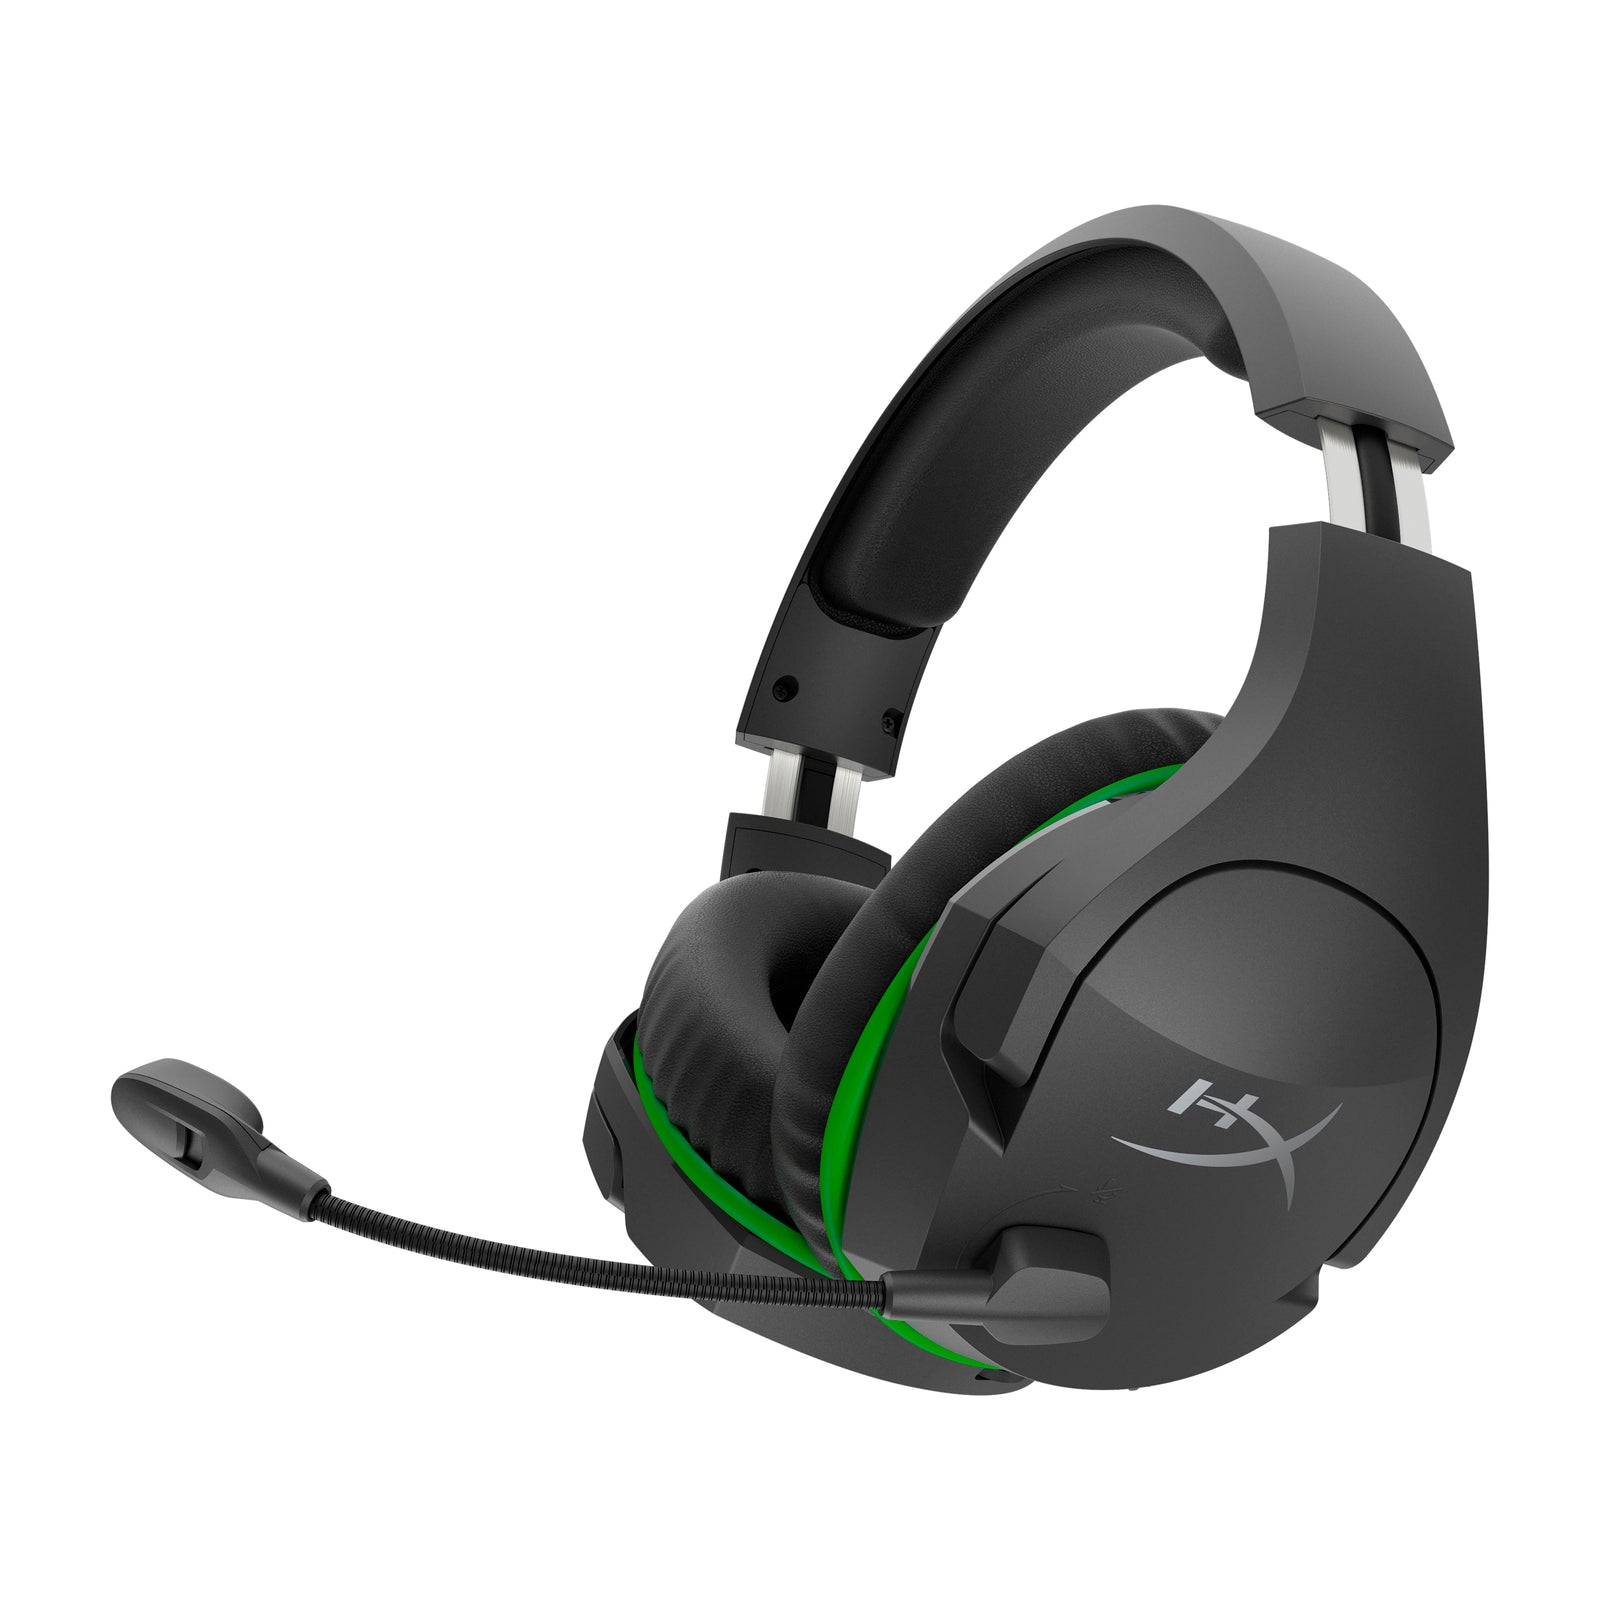 CloudX Stinger Core Wireless Headset HyperX HyperX – Xbox ROW Gaming for 